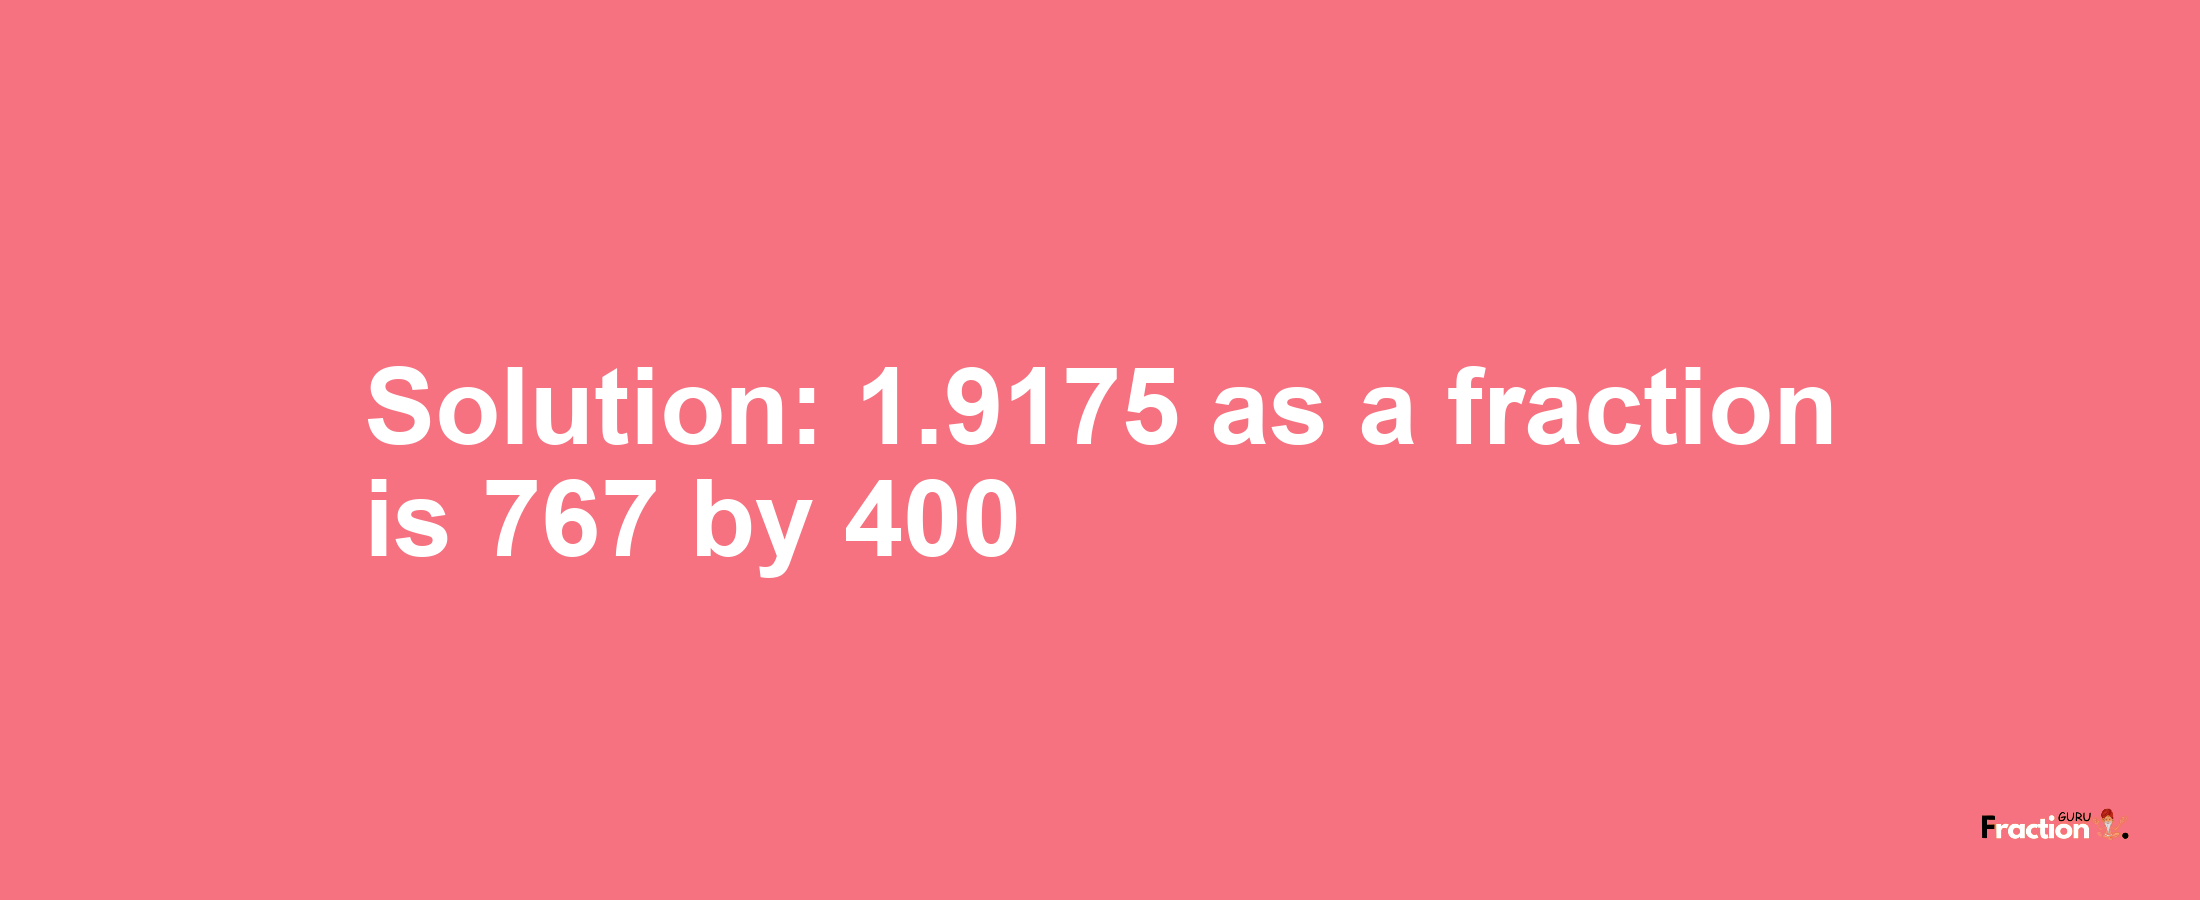 Solution:1.9175 as a fraction is 767/400